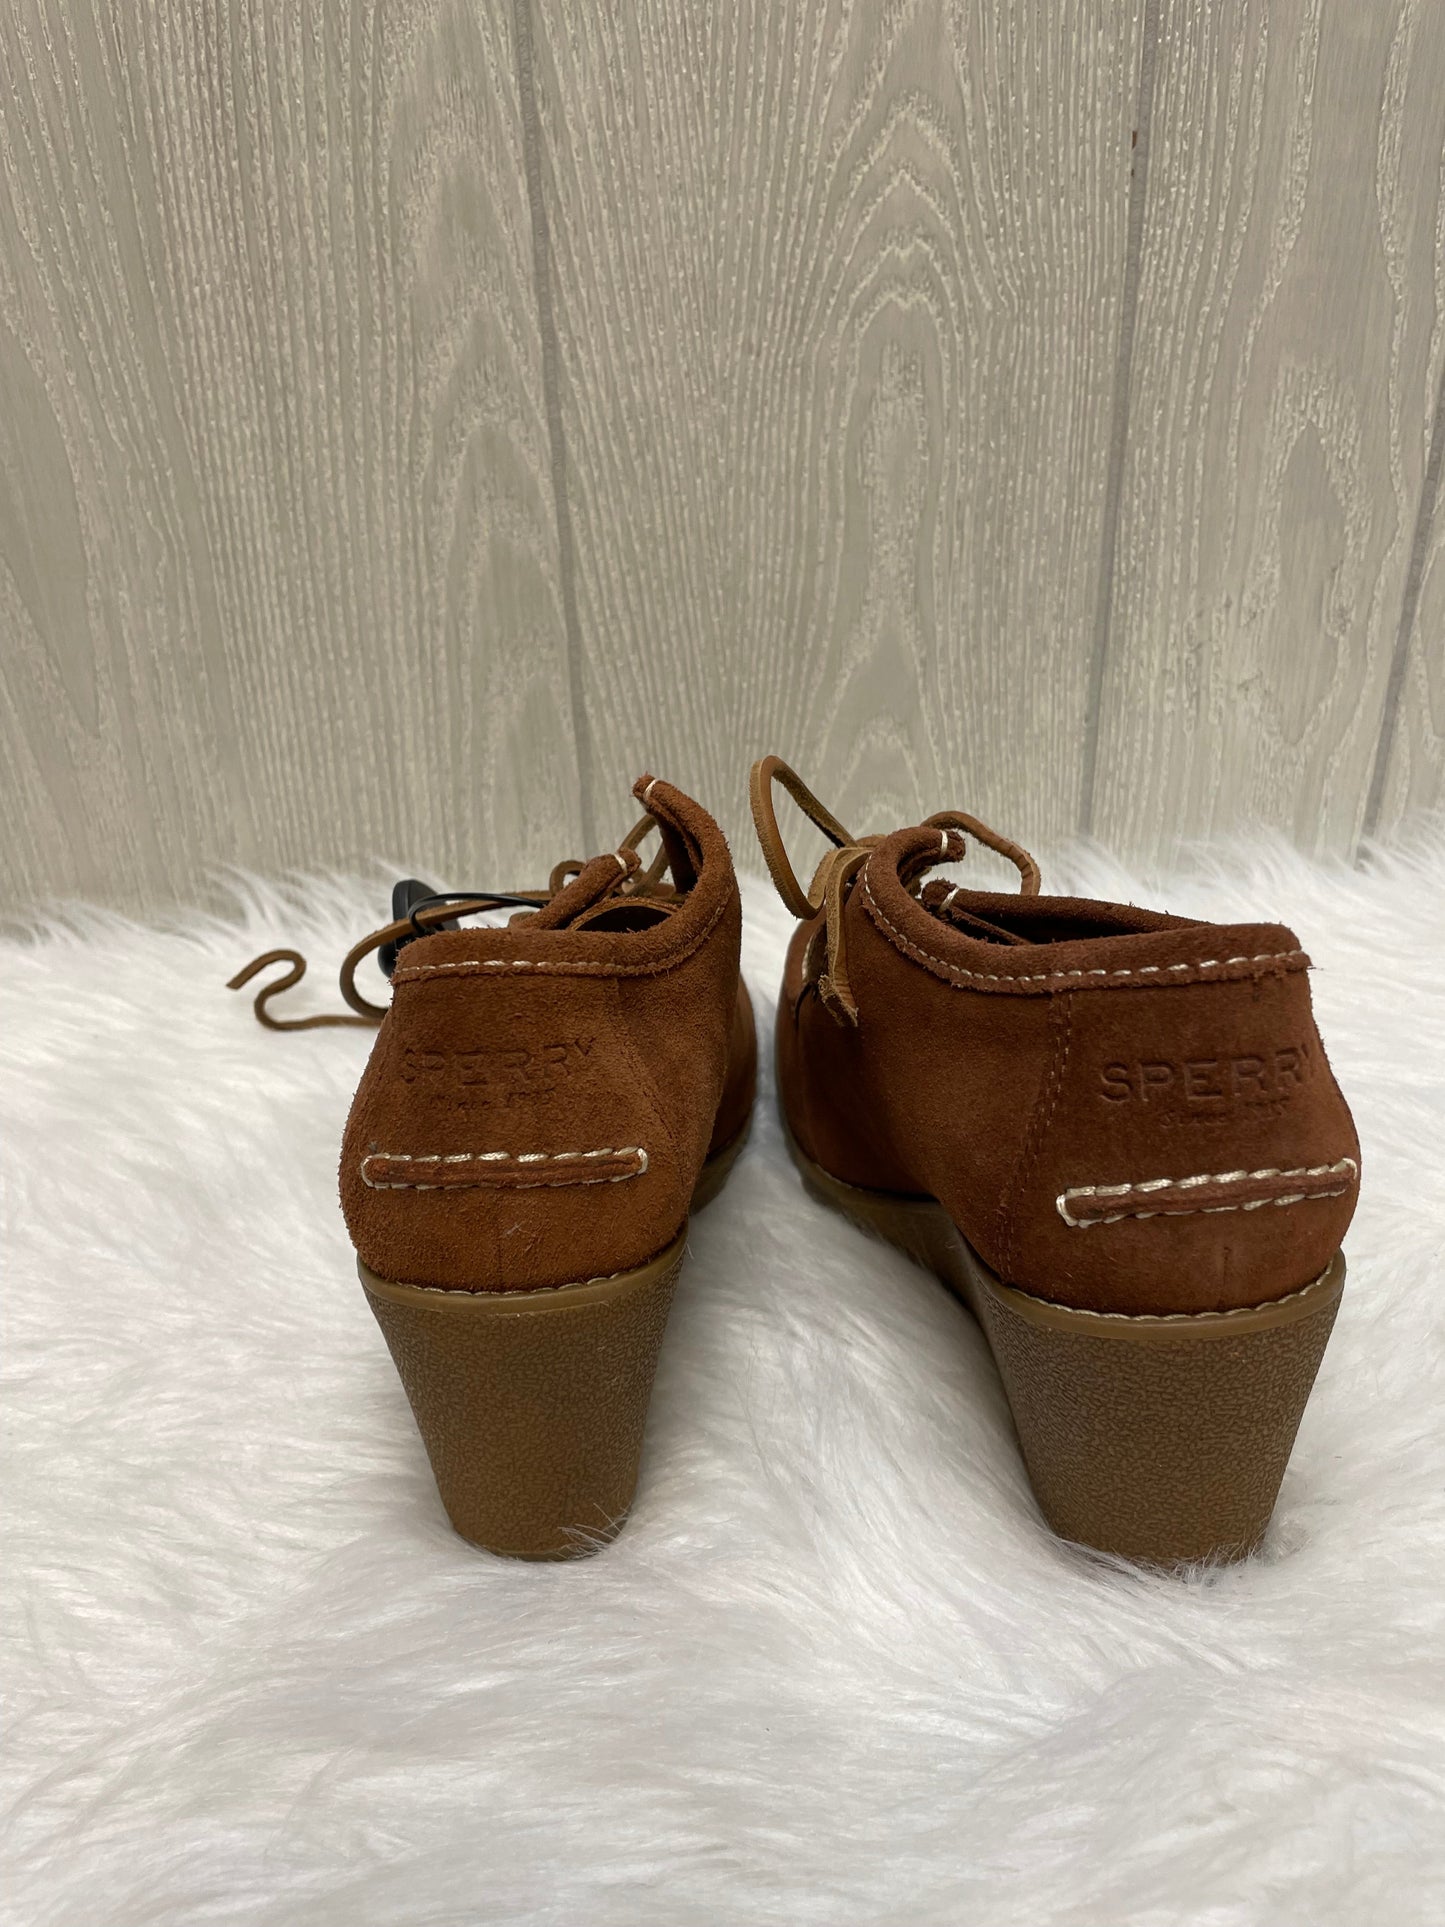 Brown Shoes Heels Wedge Sperry, Size 8.5